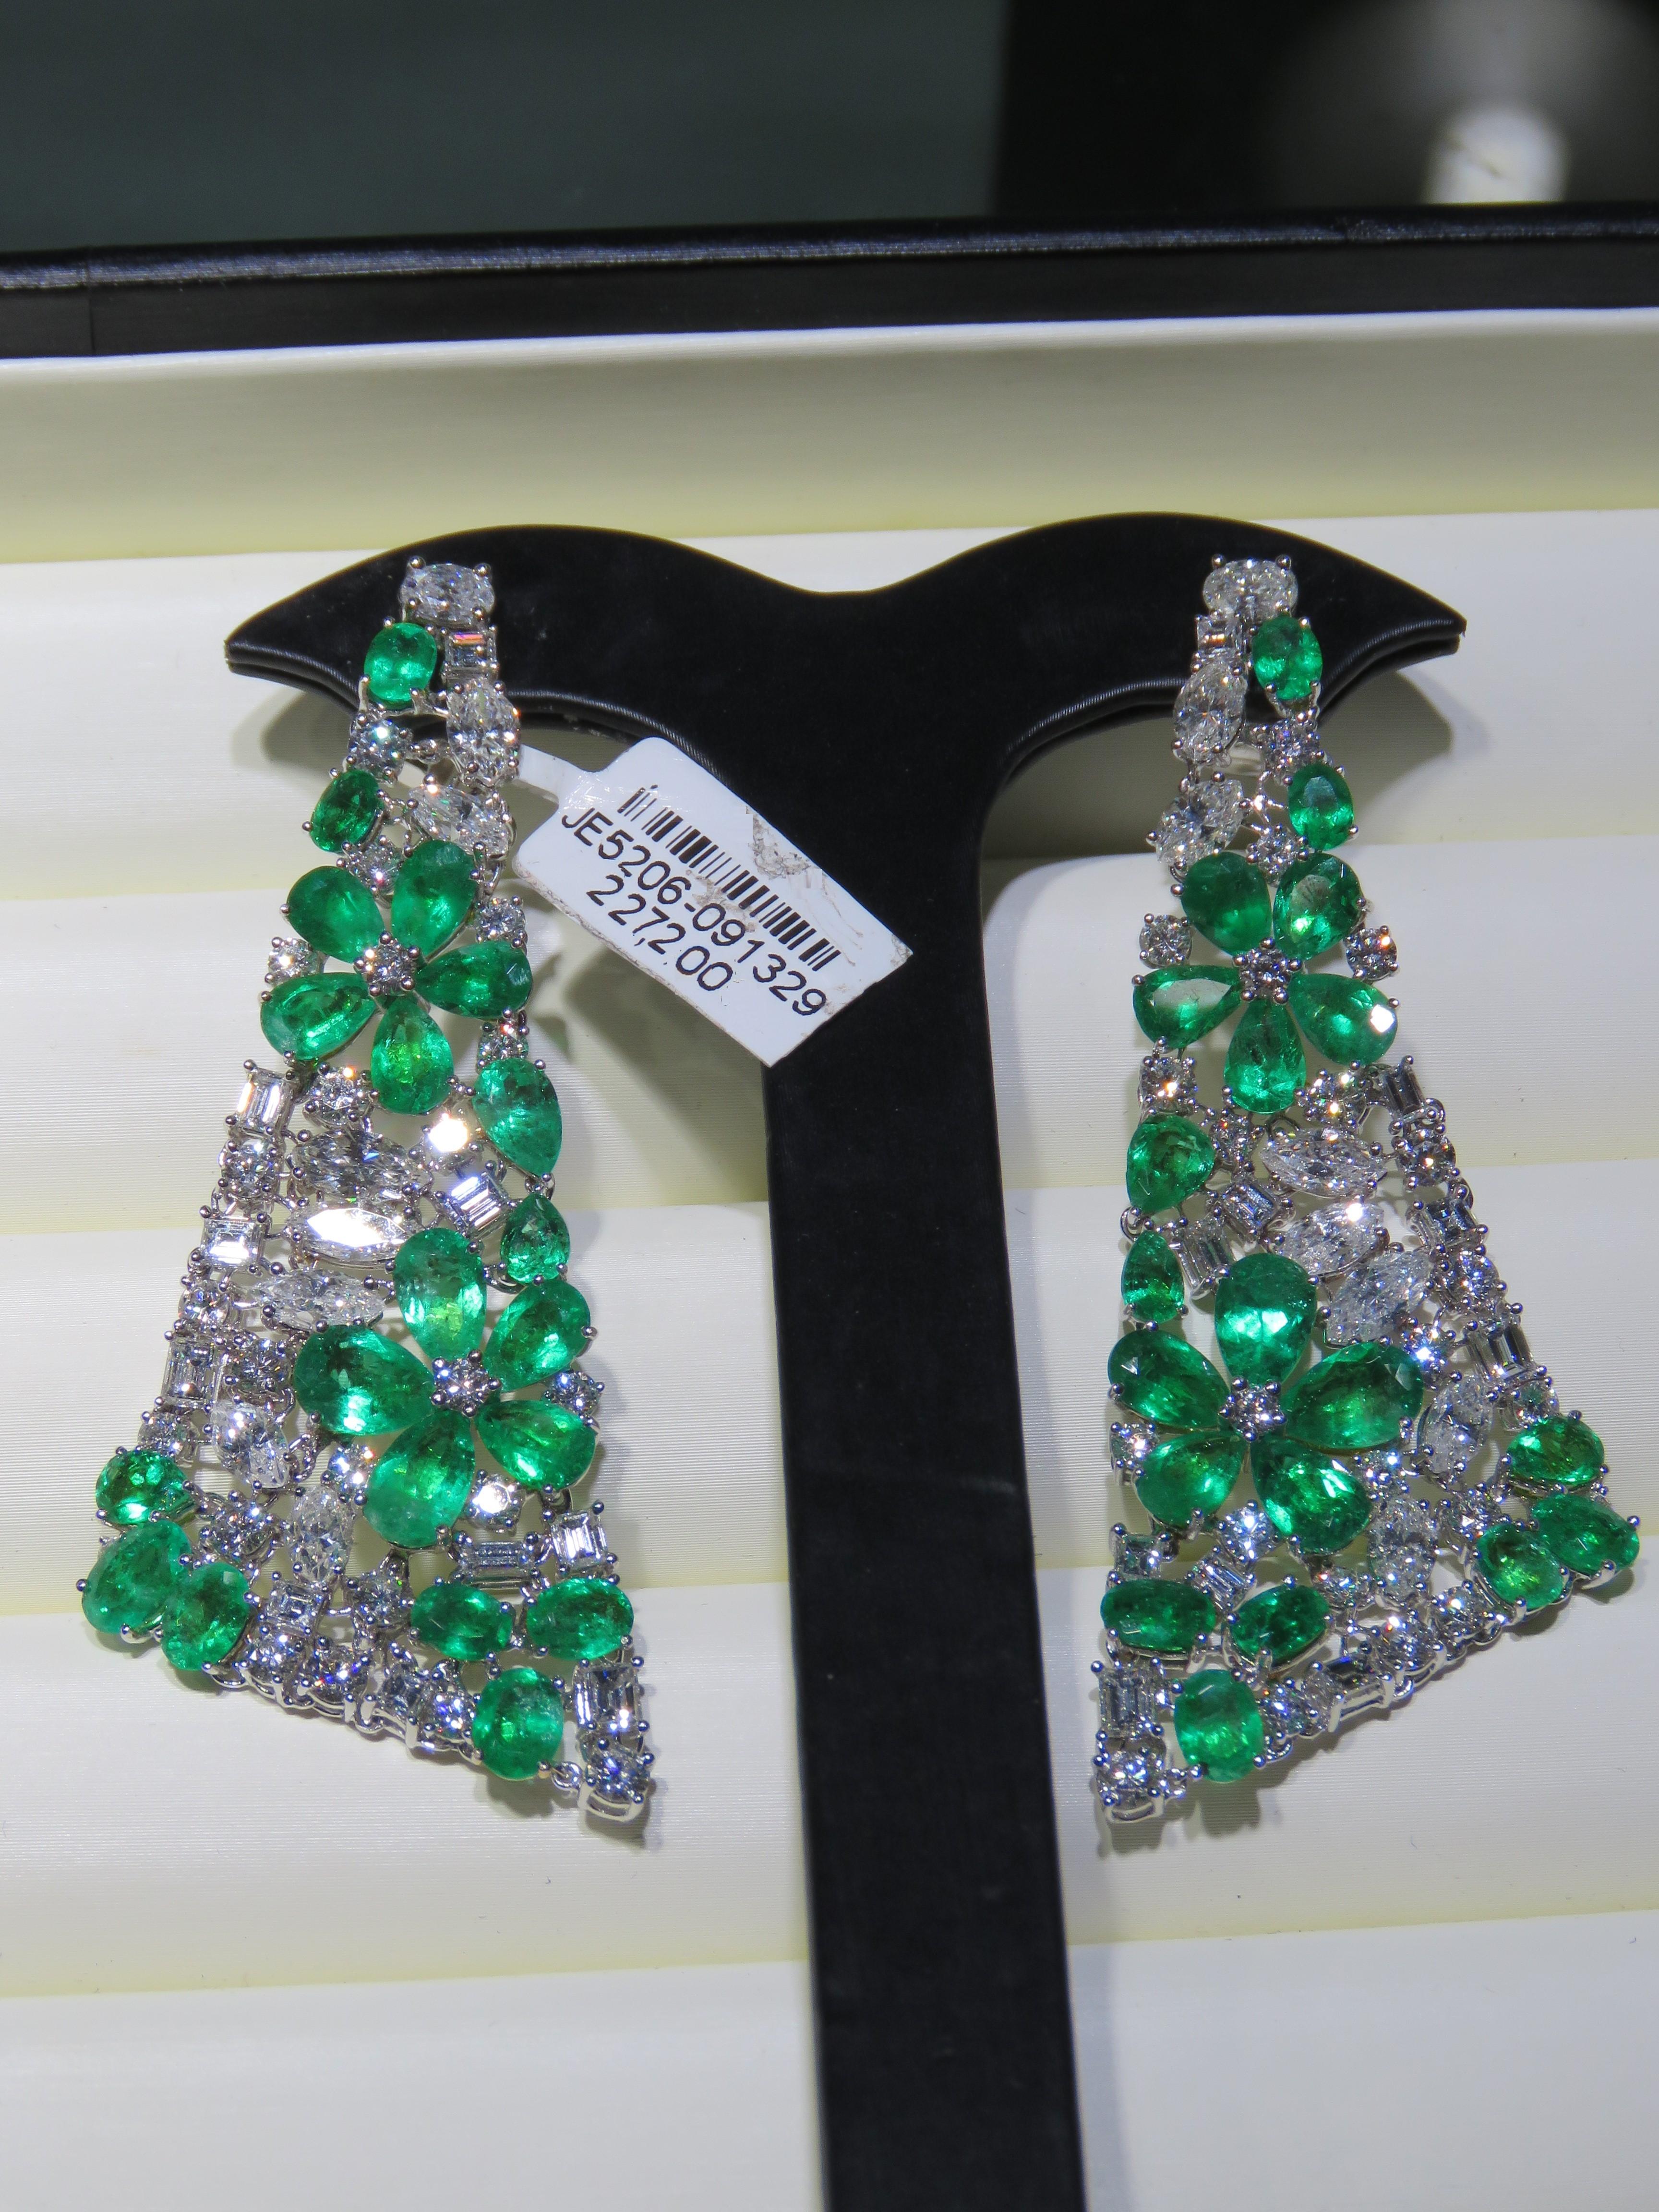 The Following Item we are offering is this Rare Important Radiant 18KT Gold Gorgeous Glittering and Sparkling Magnificent Fancy Colombian Emerald and Diamond Dangle Earrings. Earrings Contains approx 35CTS of Beautiful Fancy Cut Colombian Emeralds